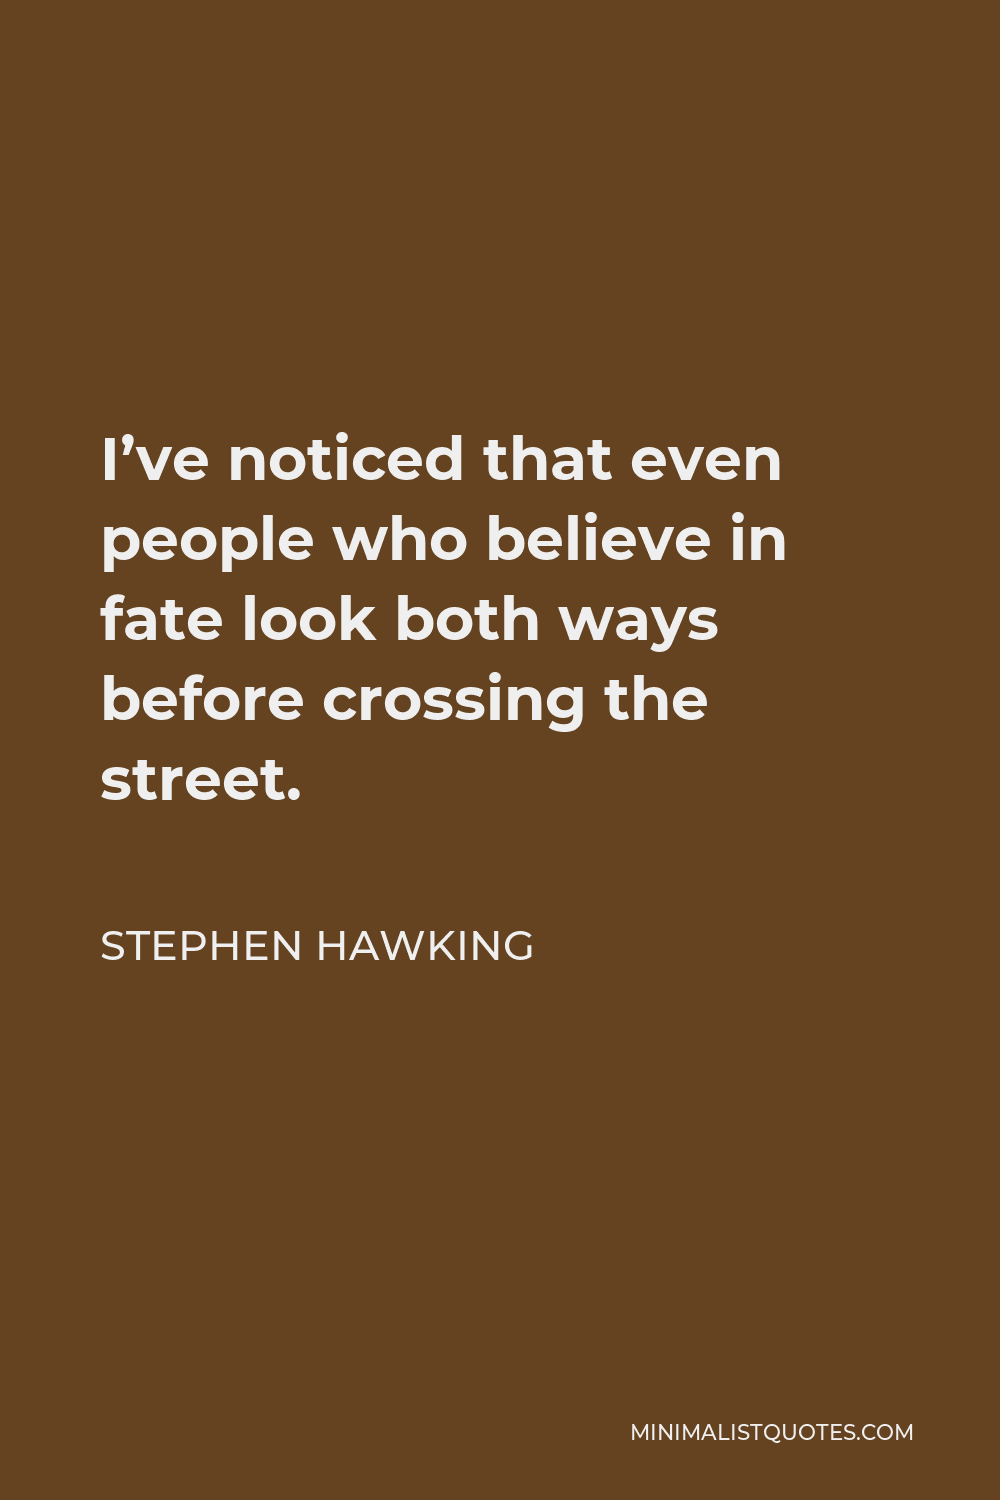 Stephen Hawking Quote - I’ve noticed that even people who believe in fate look both ways before crossing the street.